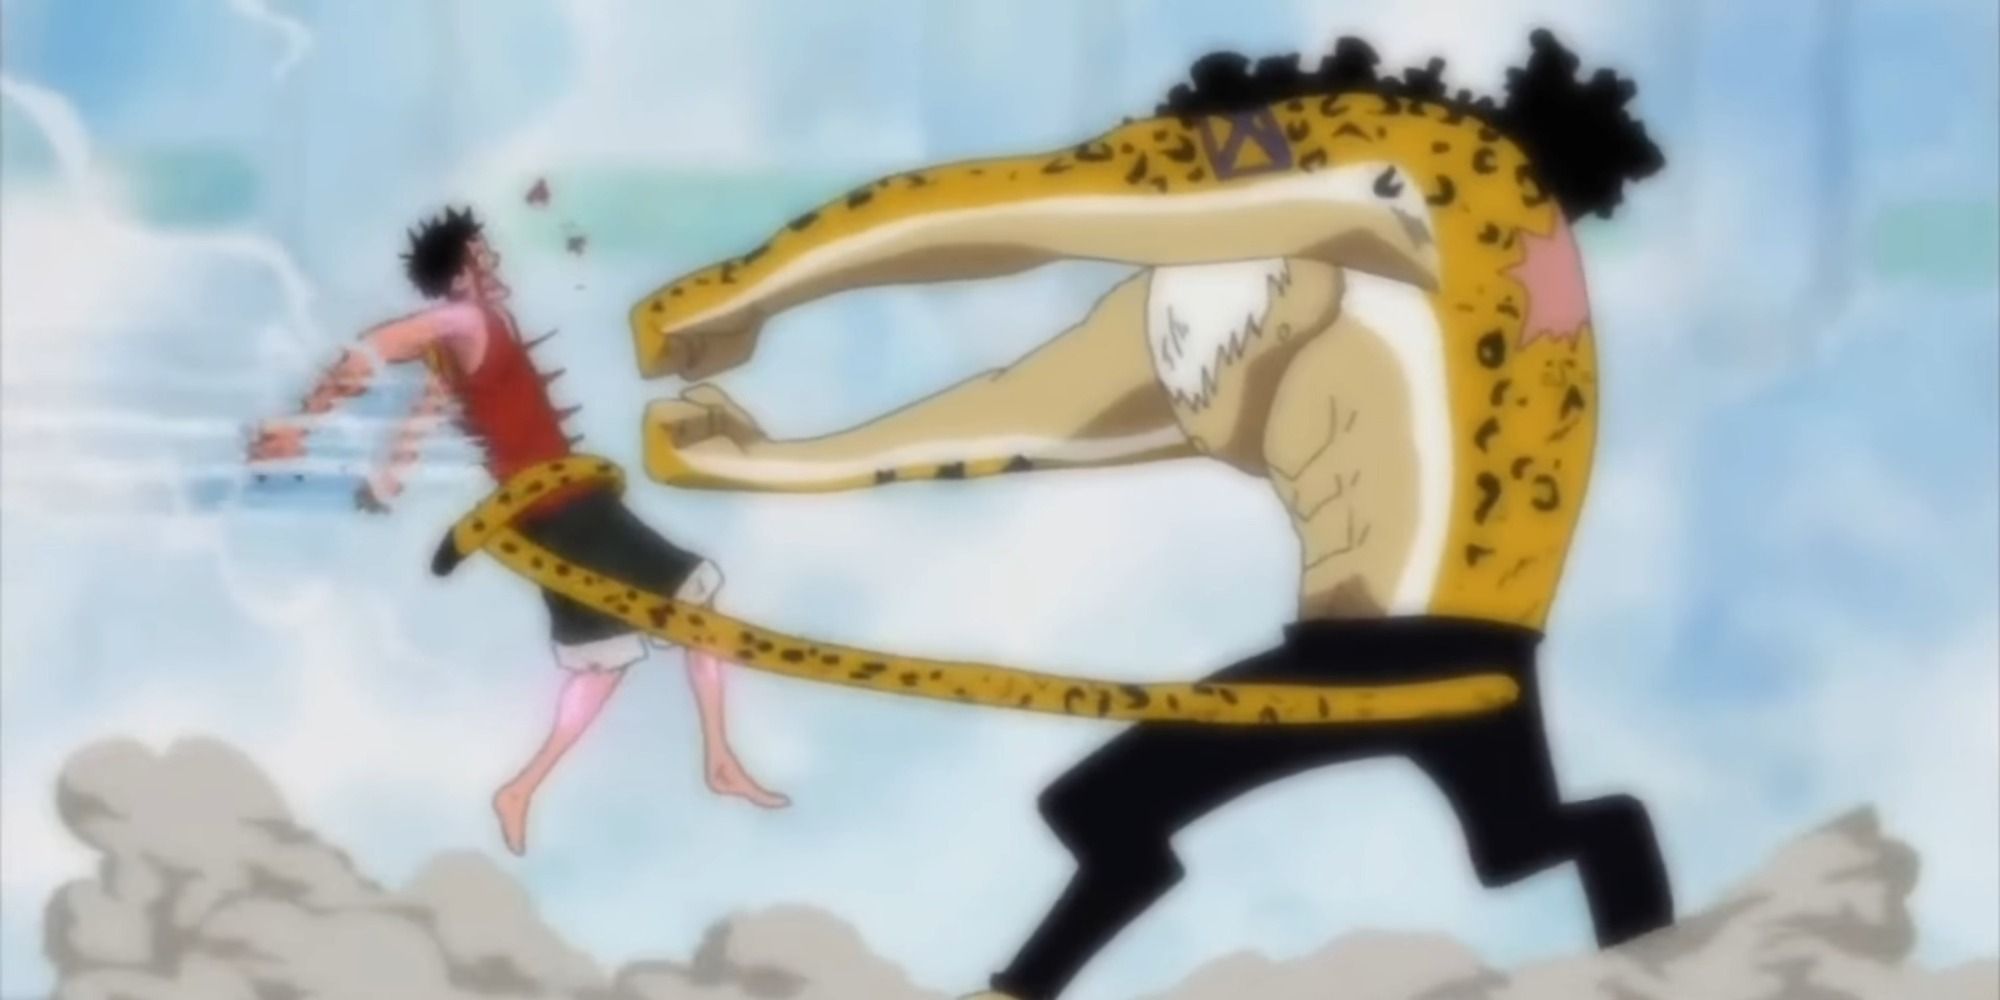 Luffy vs Lucci is the best One Piece fight.